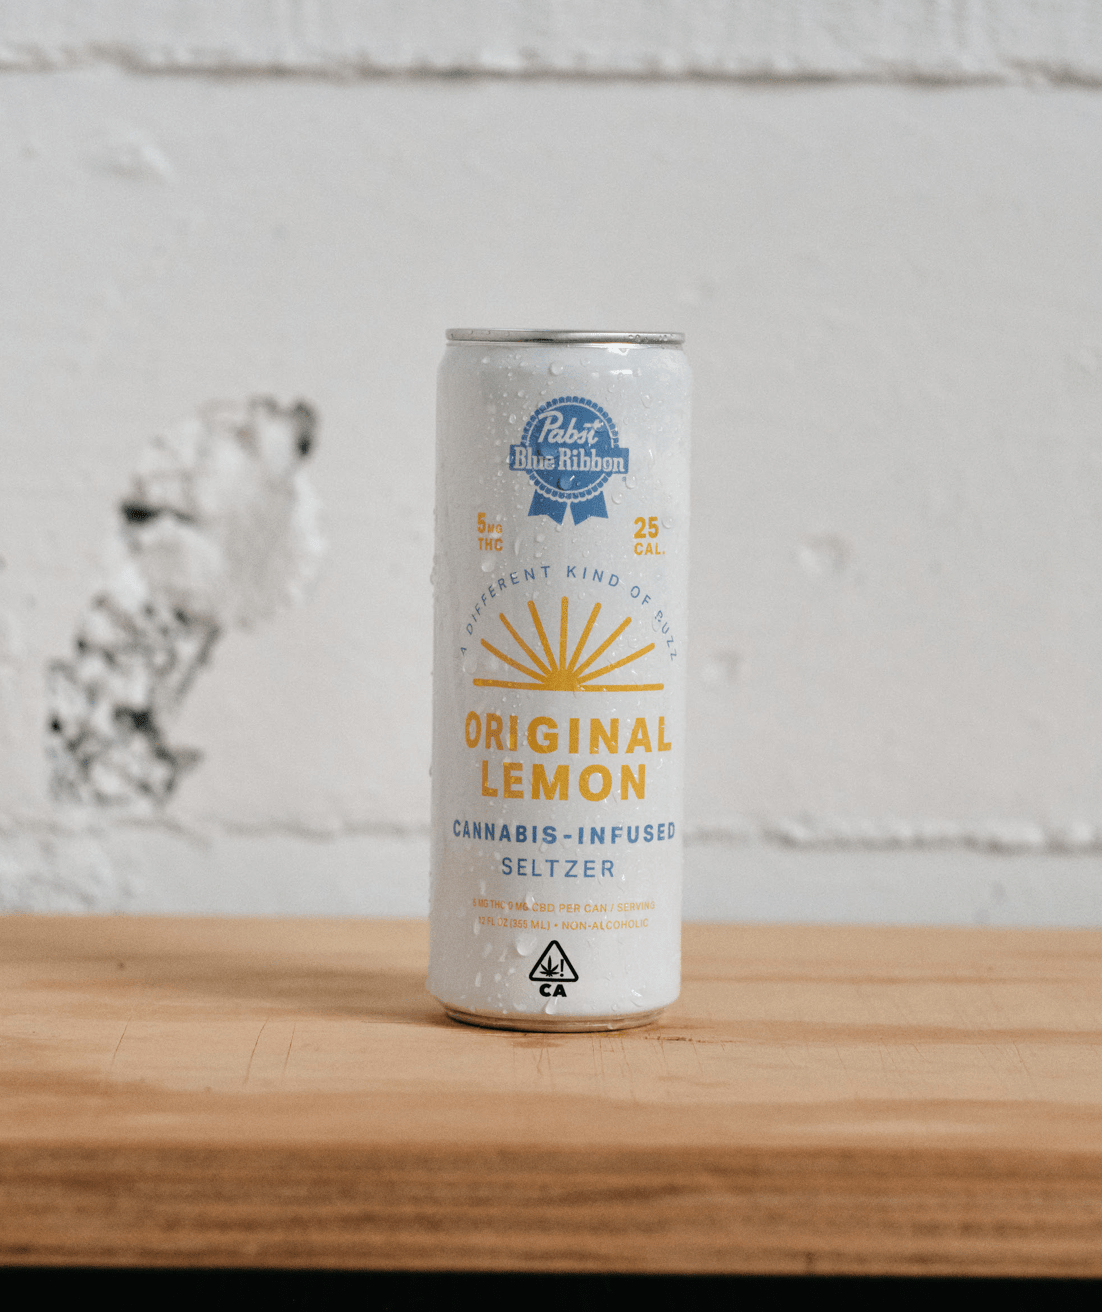 PBR Cannabis Infused Seltzer